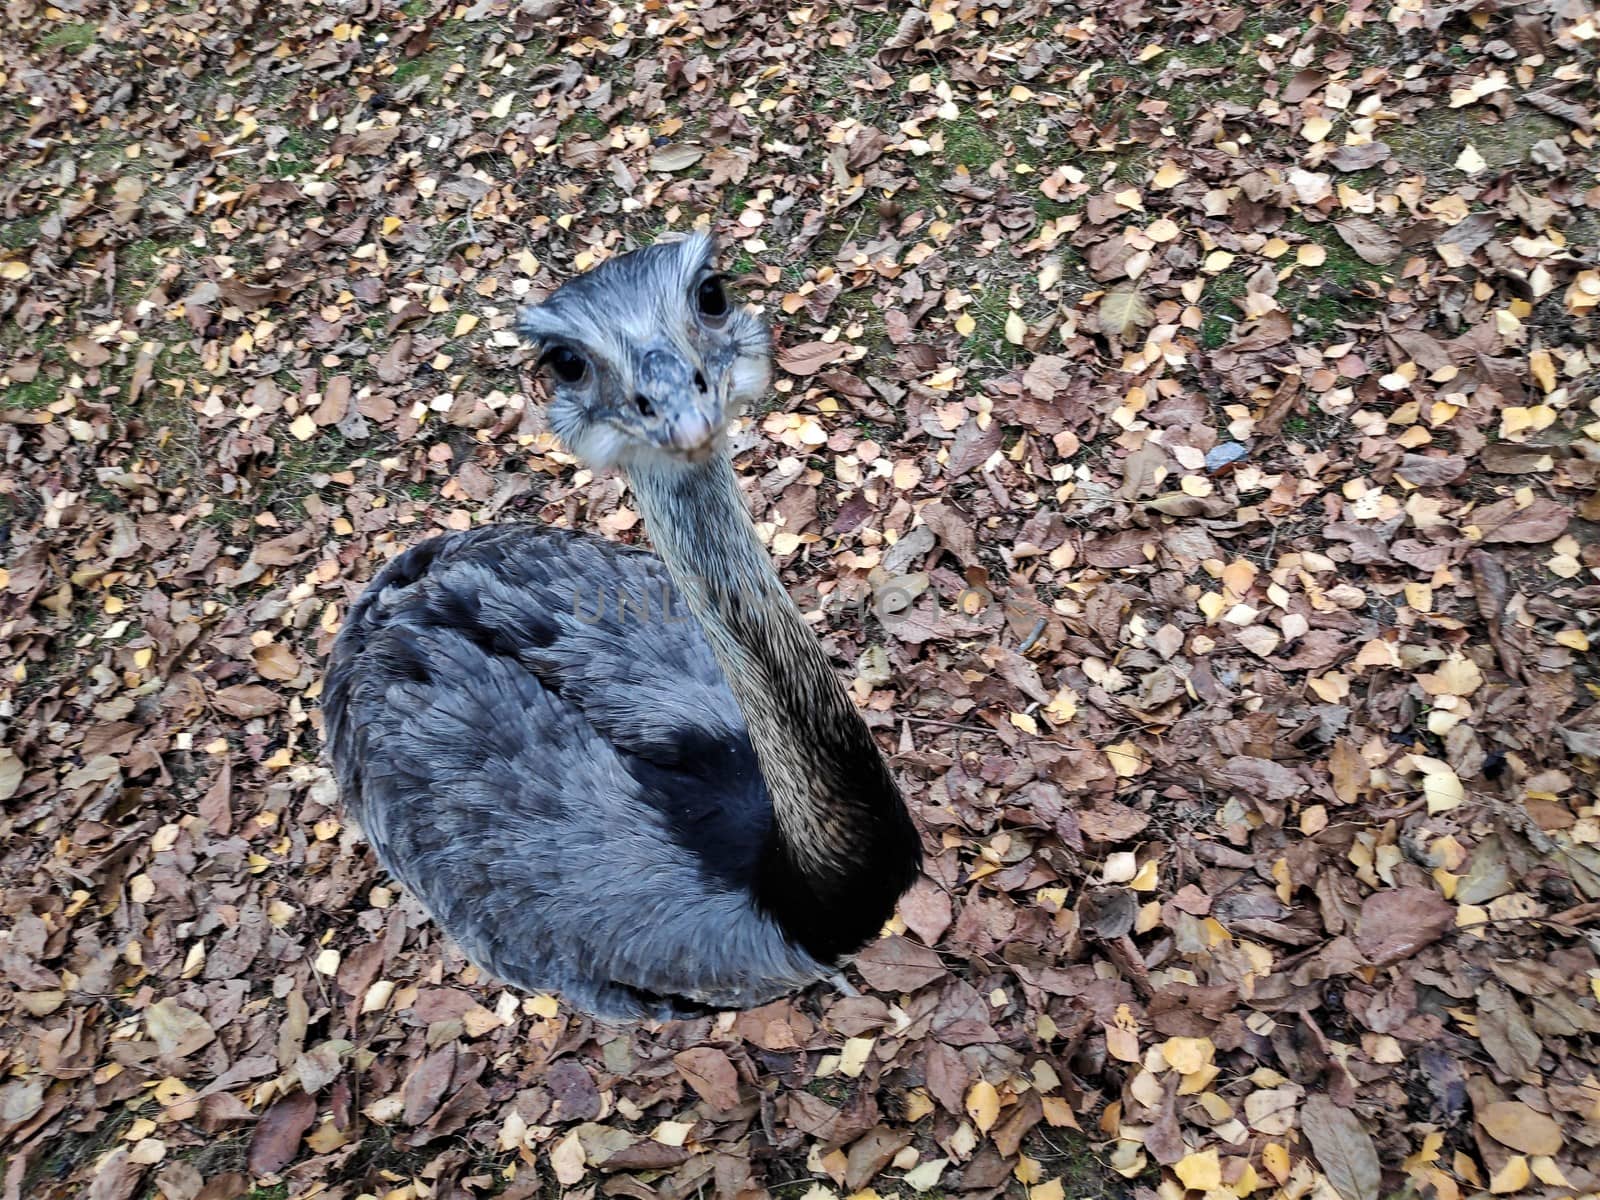 Greater rhea looking directly into the camera looking curious